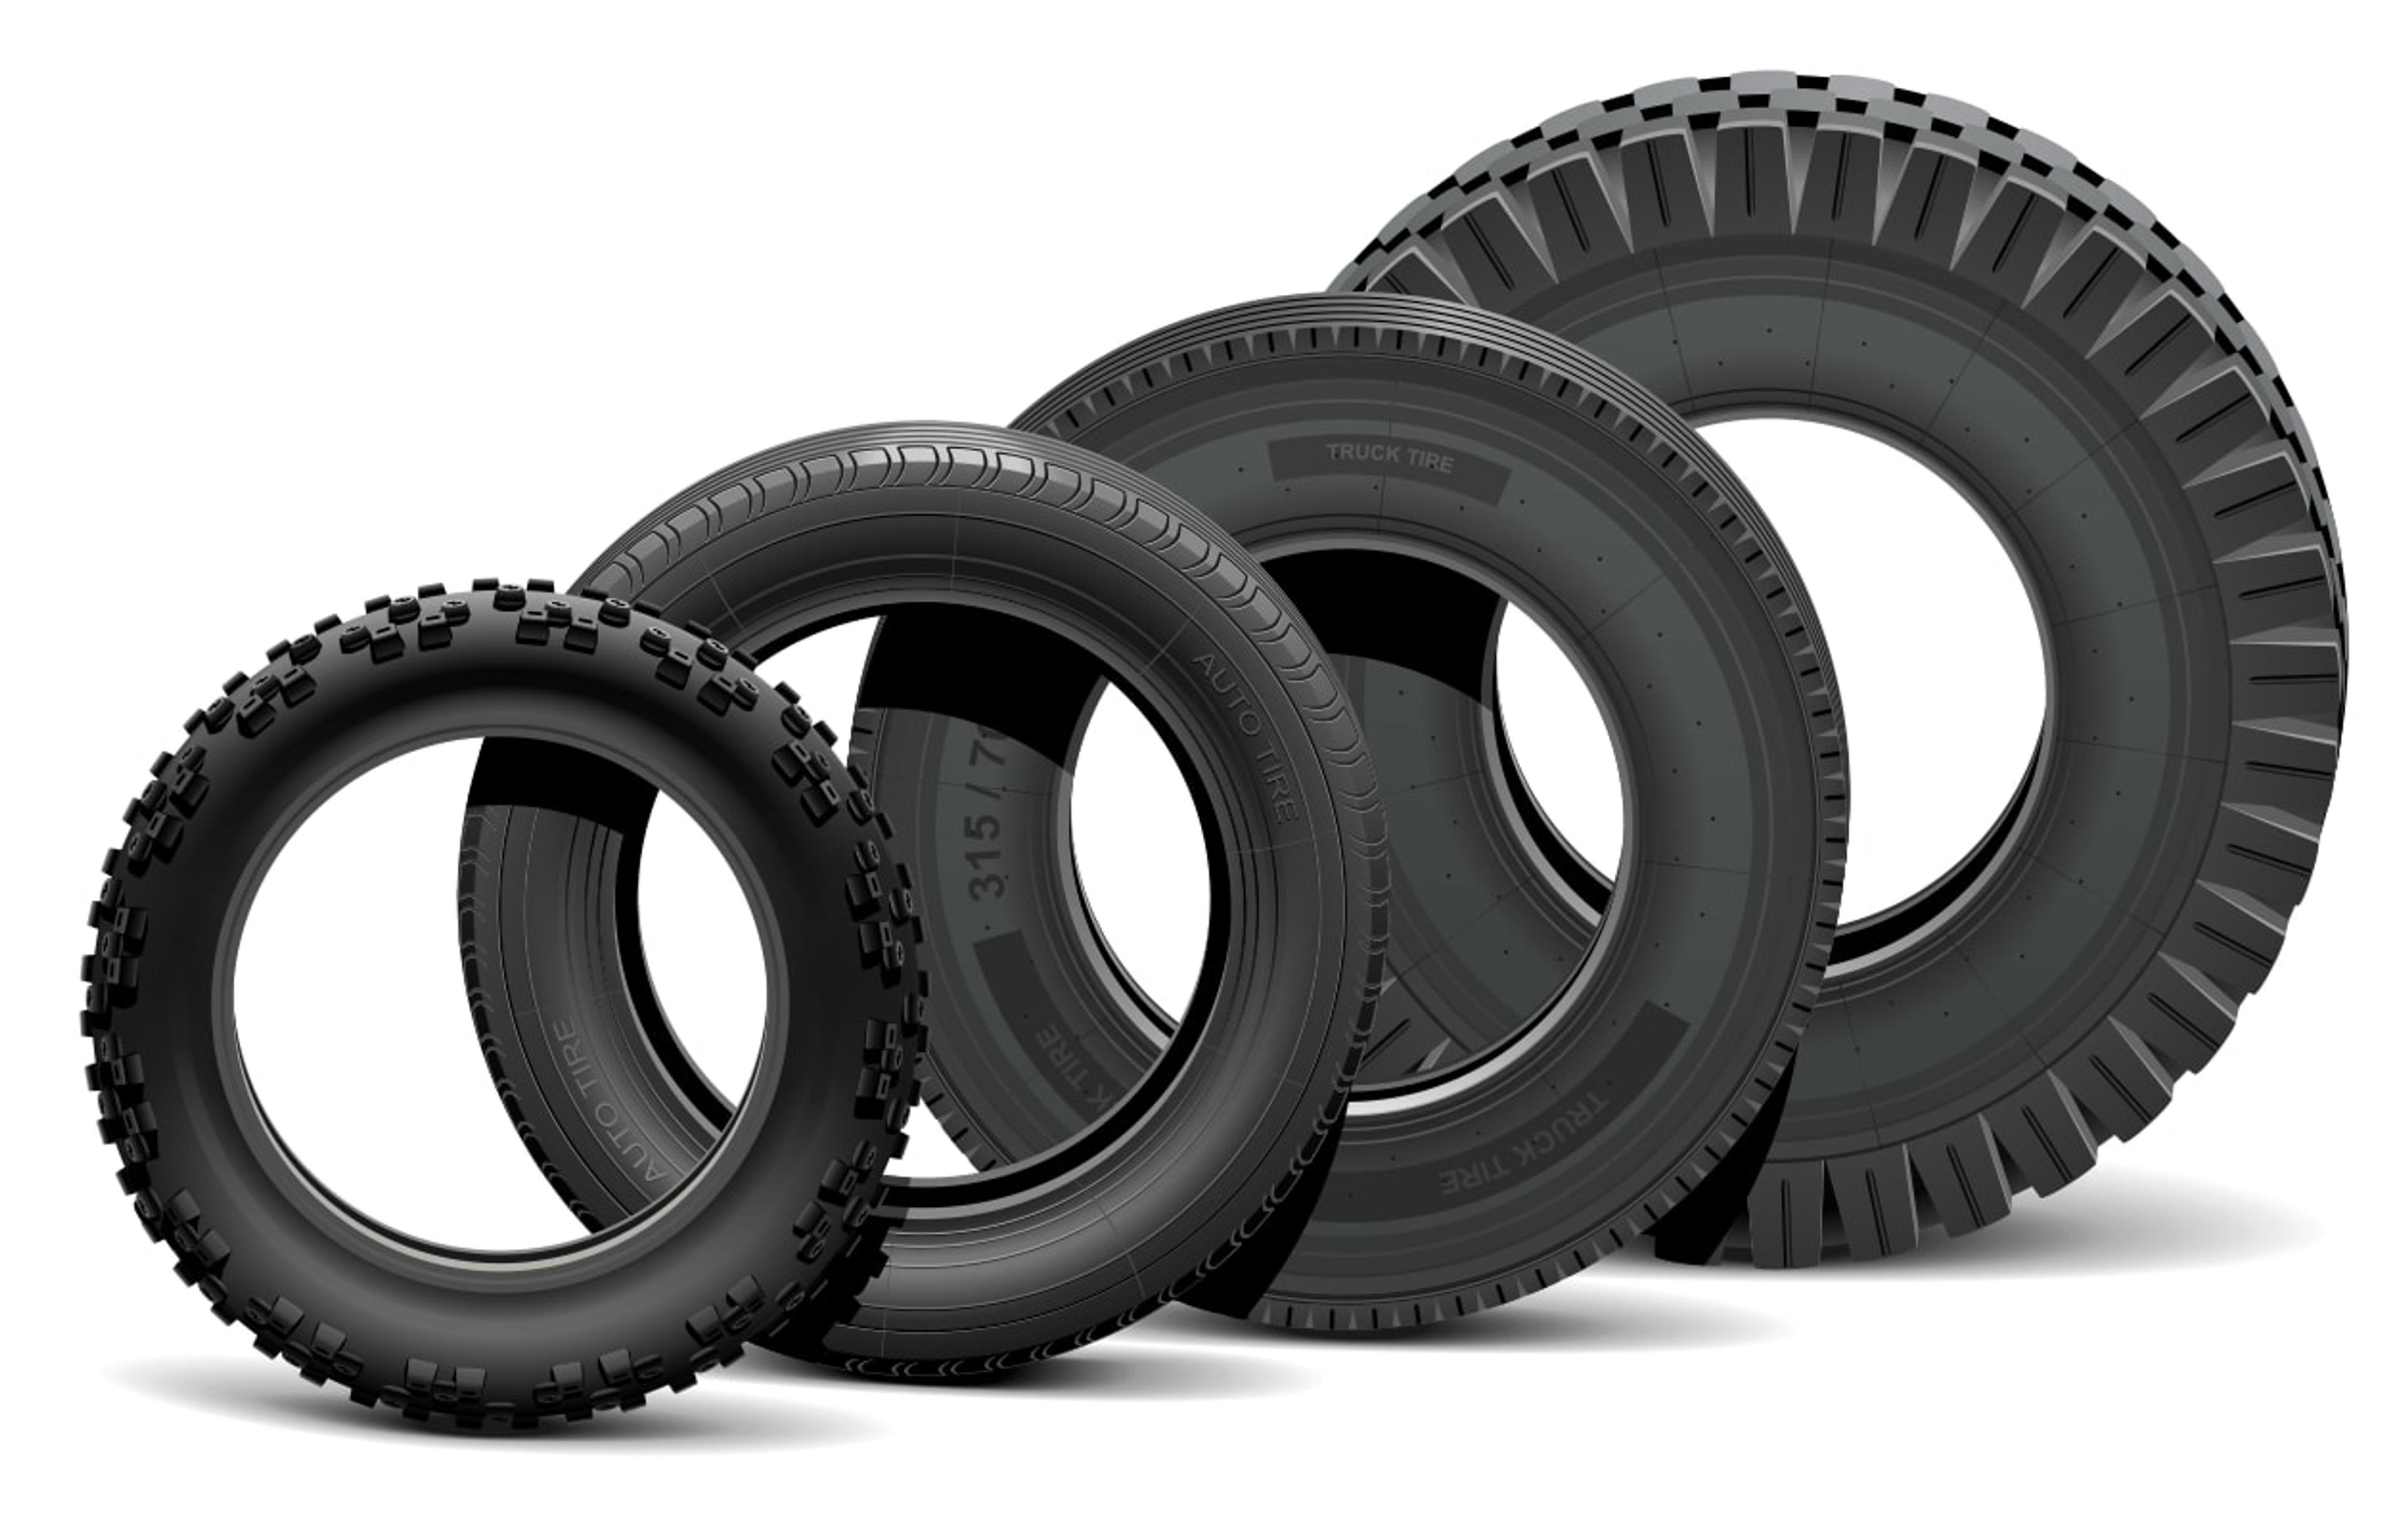 Finding the right sized tire for your vehicle is easy on SimpleTire.com